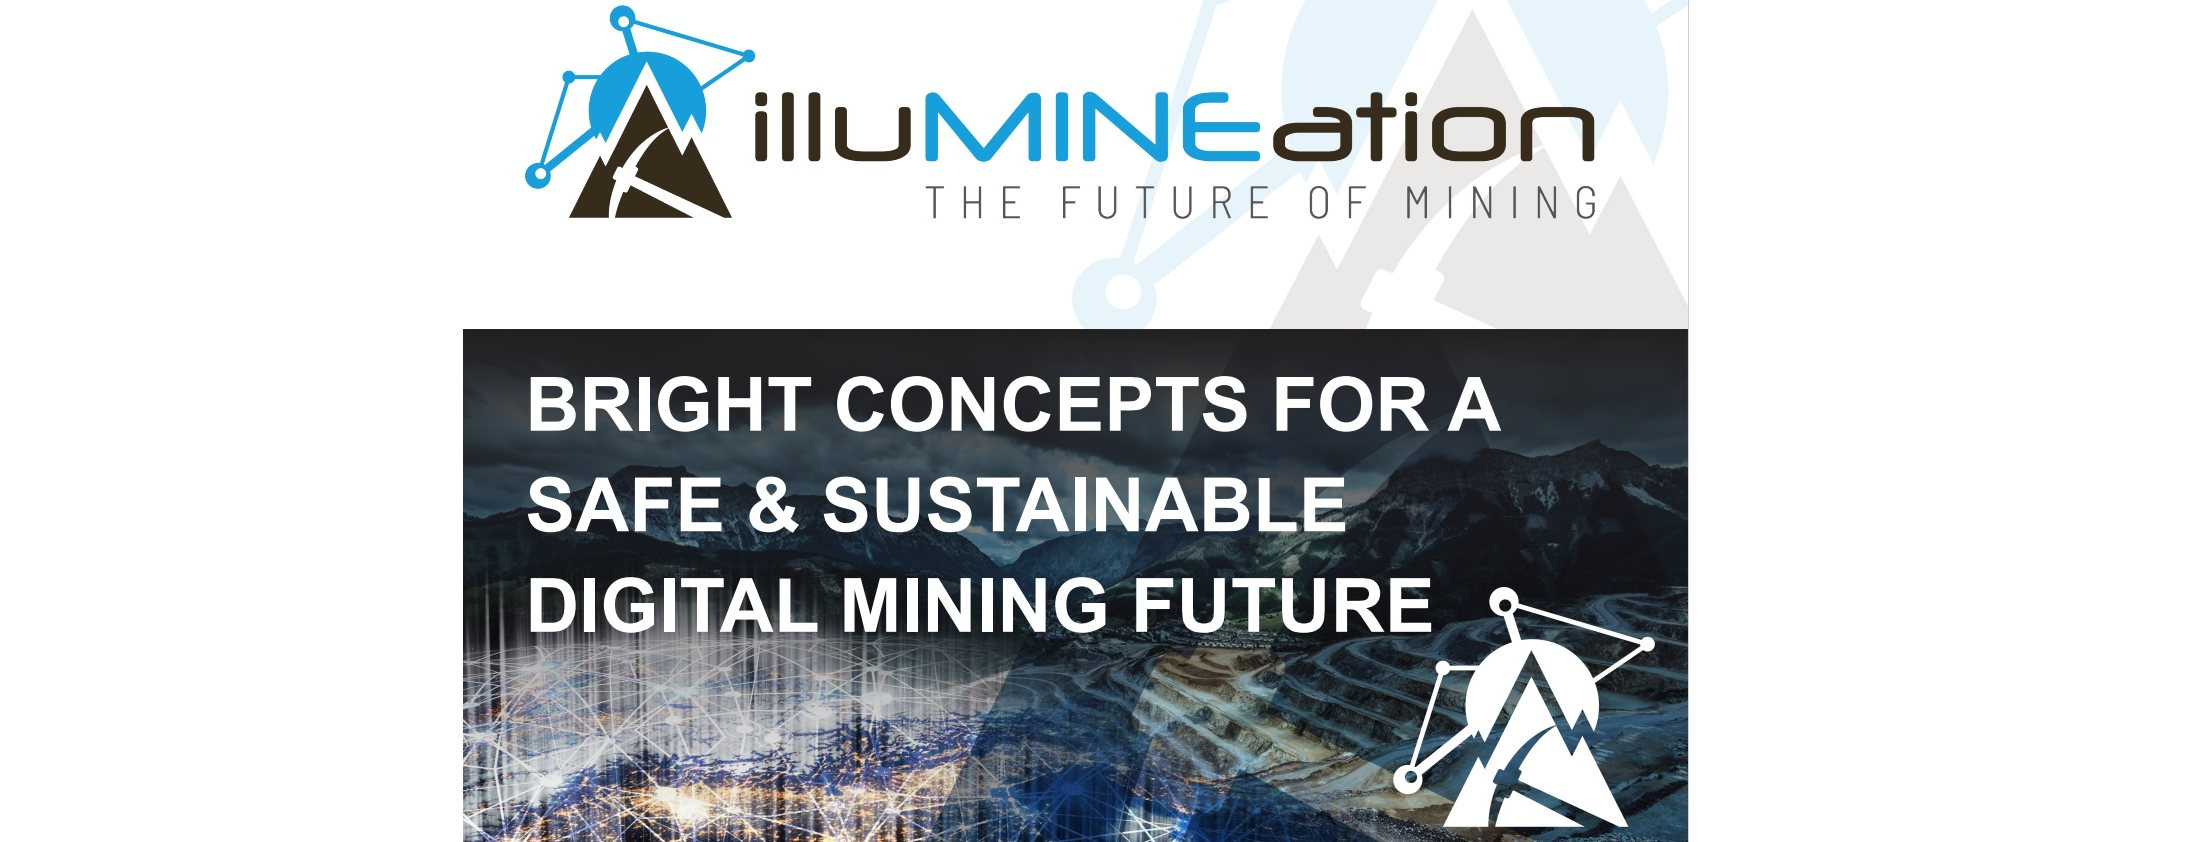 Digitalization as a step towards a safe and sustainable mining future - IMA in The illuMINEation project